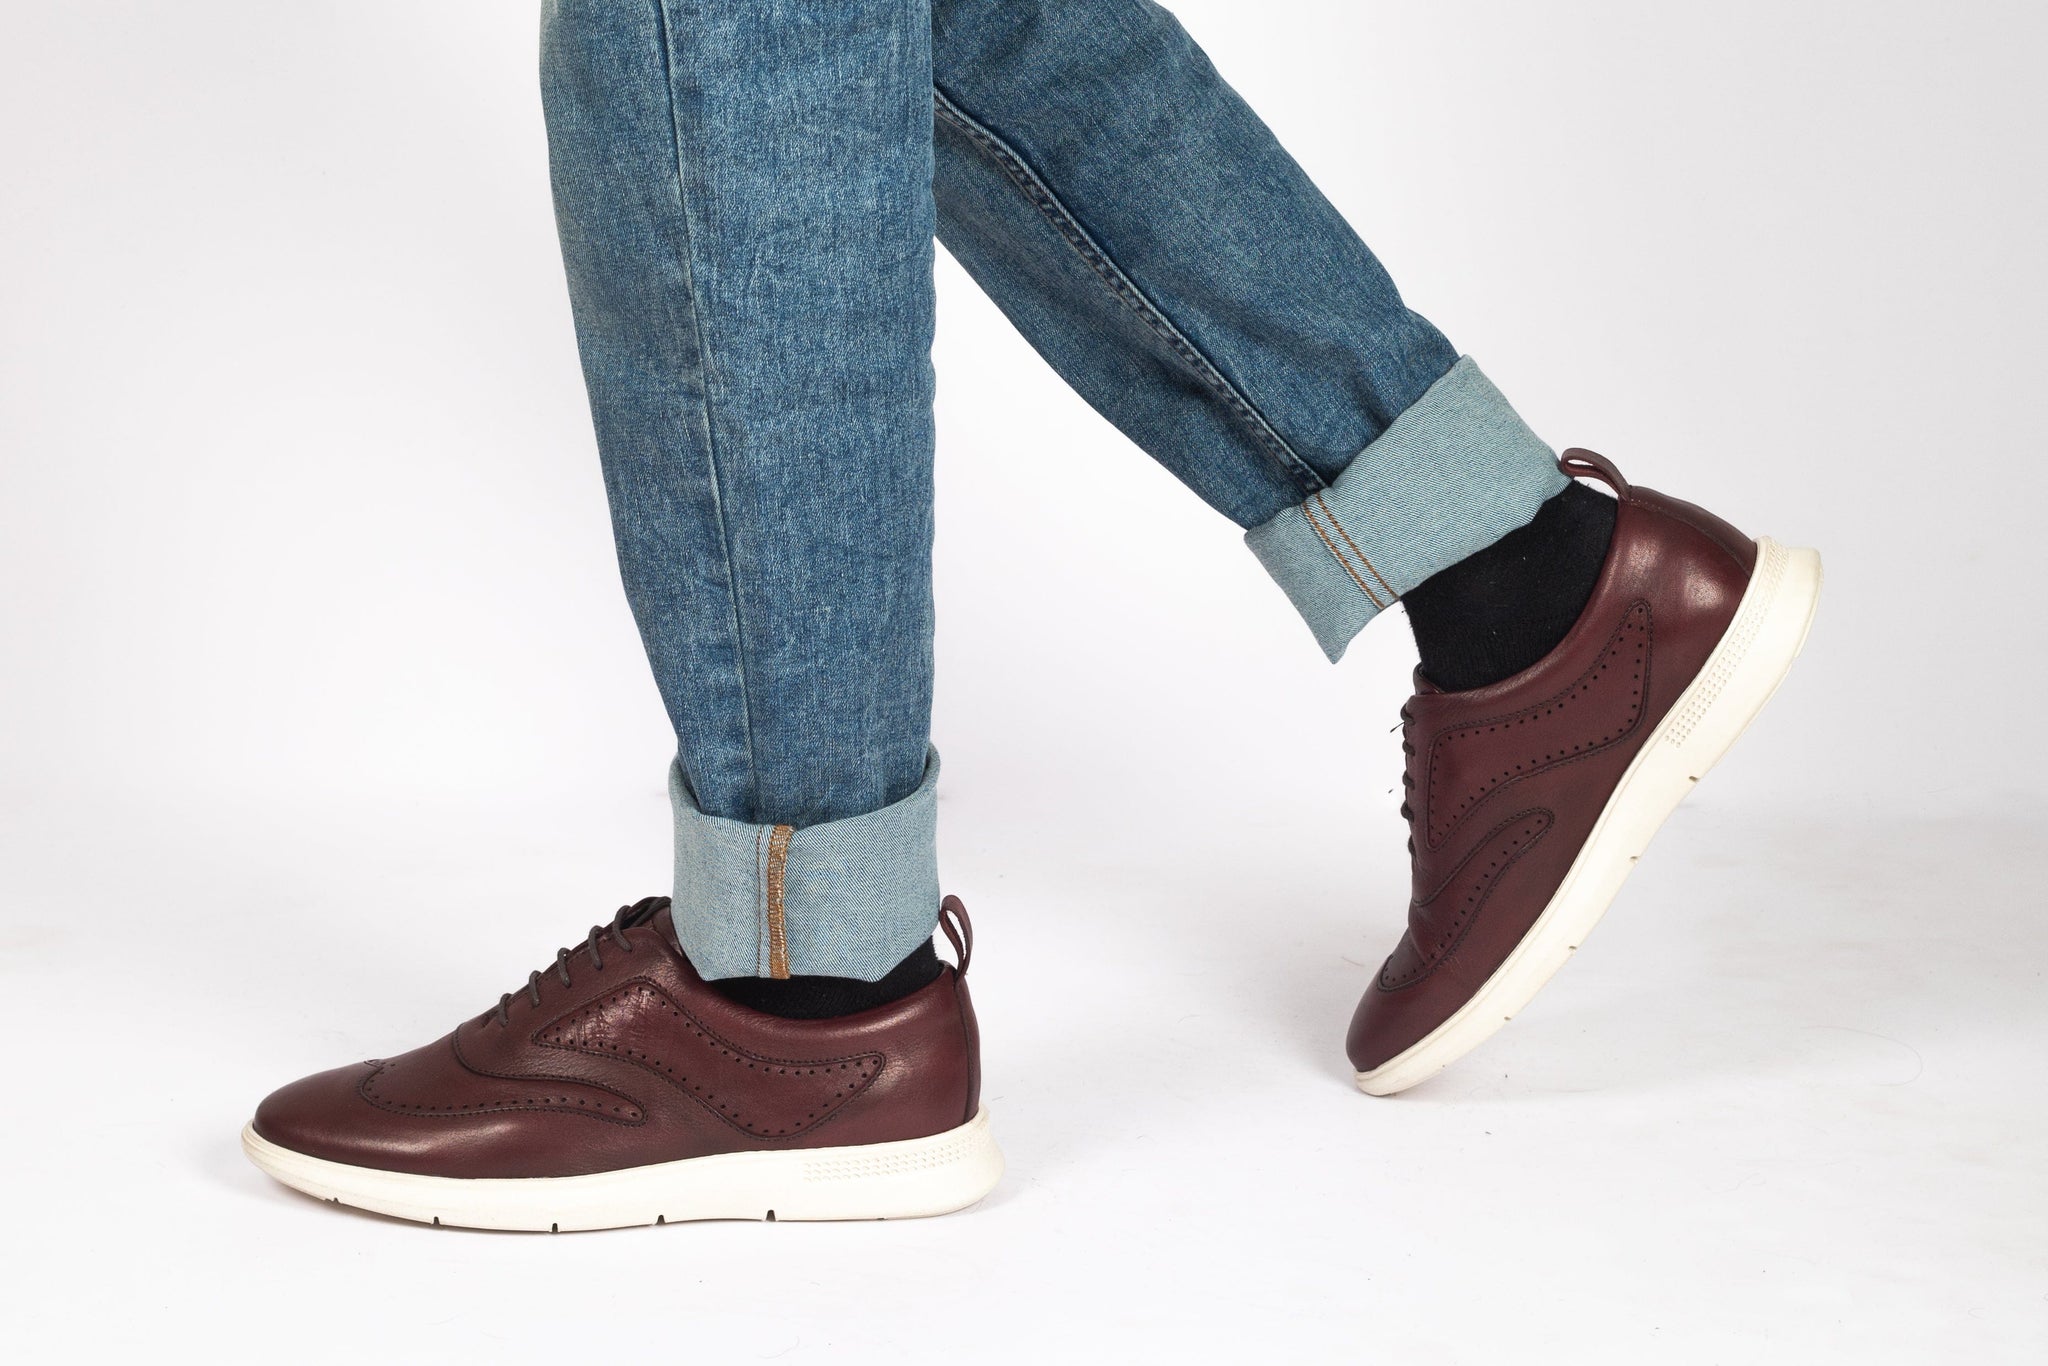 Keller - Elevator Sneakers in Full Grain Leather from 2.4 to 3.1 inches